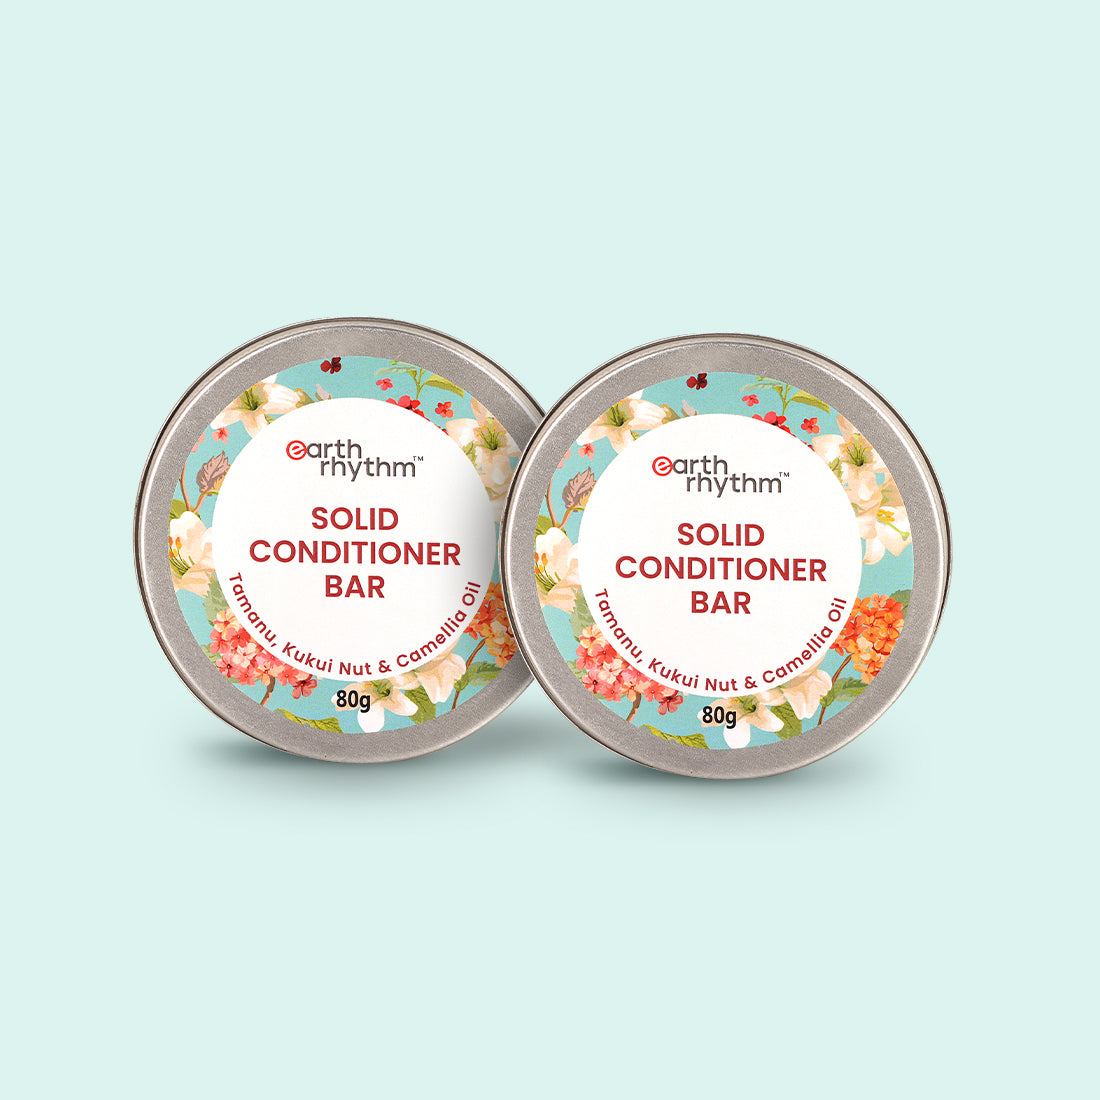 Solid Conditioner Bar For Hair - Pack of 2 Tin case